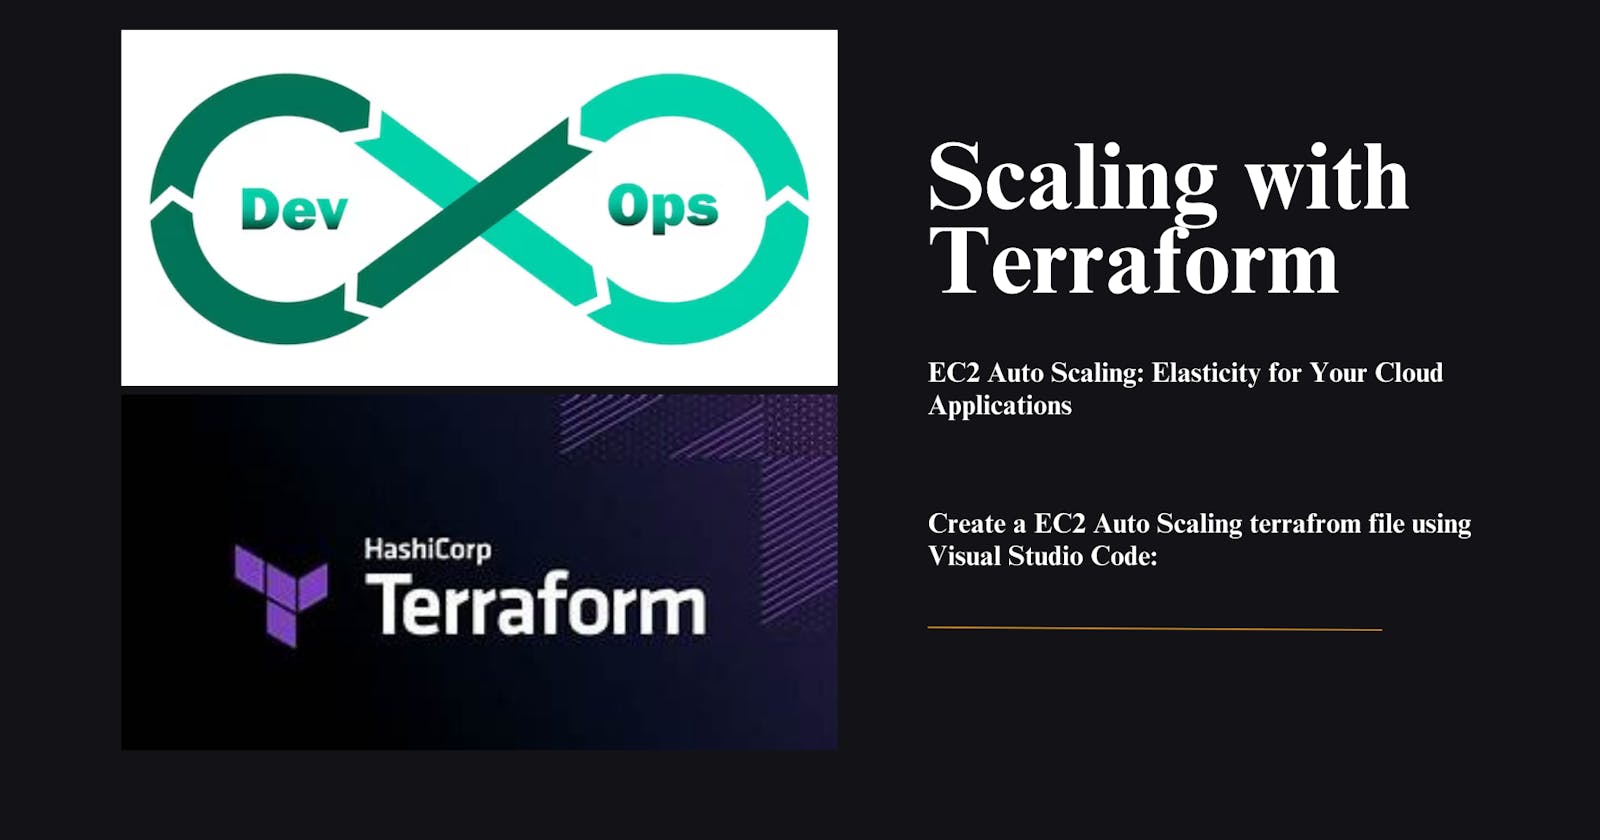 Scaling with Terraform